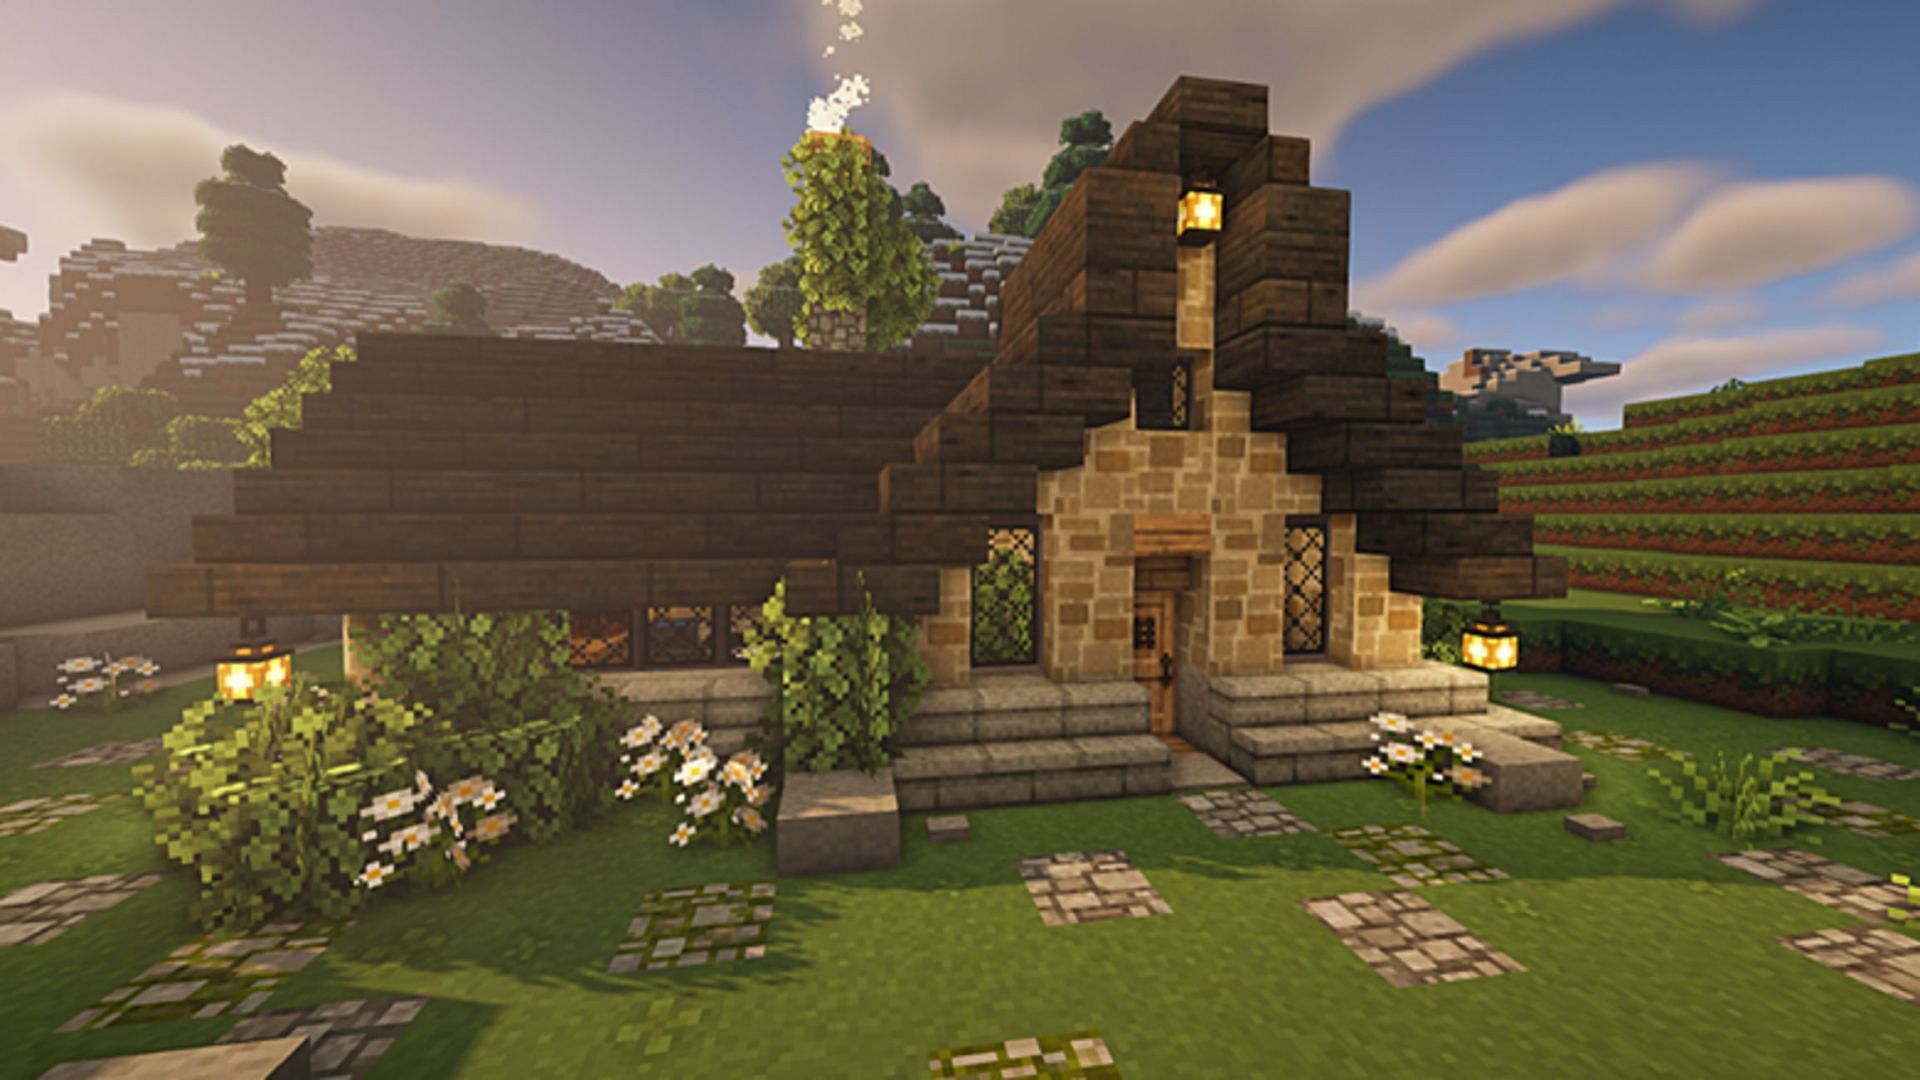 Mountain cottages can look cozy and appealing without being massive or flashy (Image via Mojang || GodessOfCrows/YouTube)